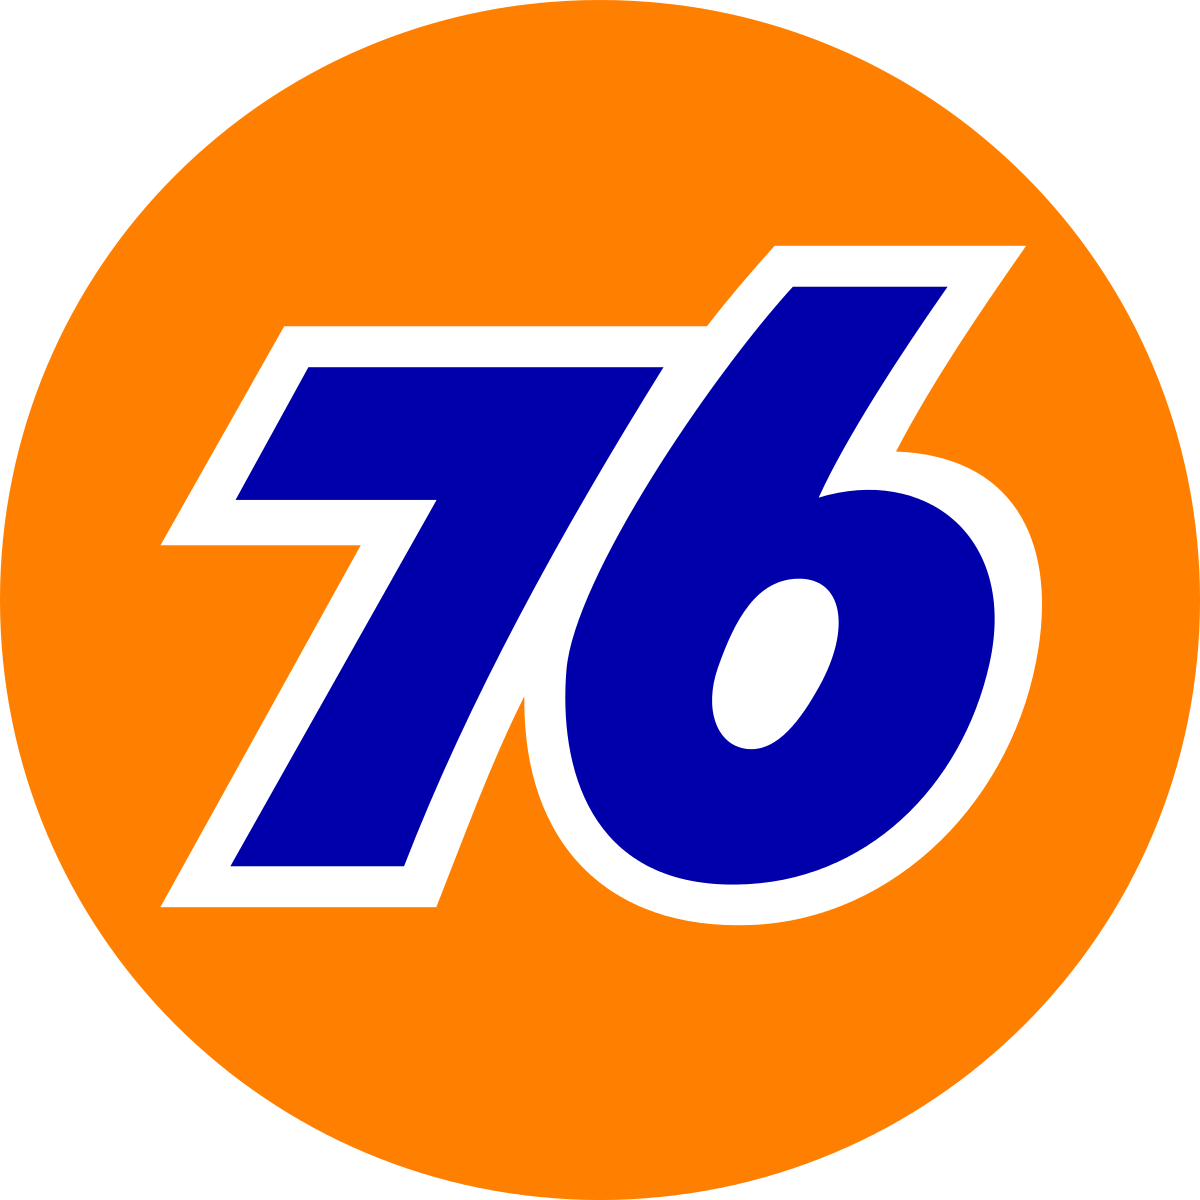 Numbers 69 Race Logo - 76 (gas station)